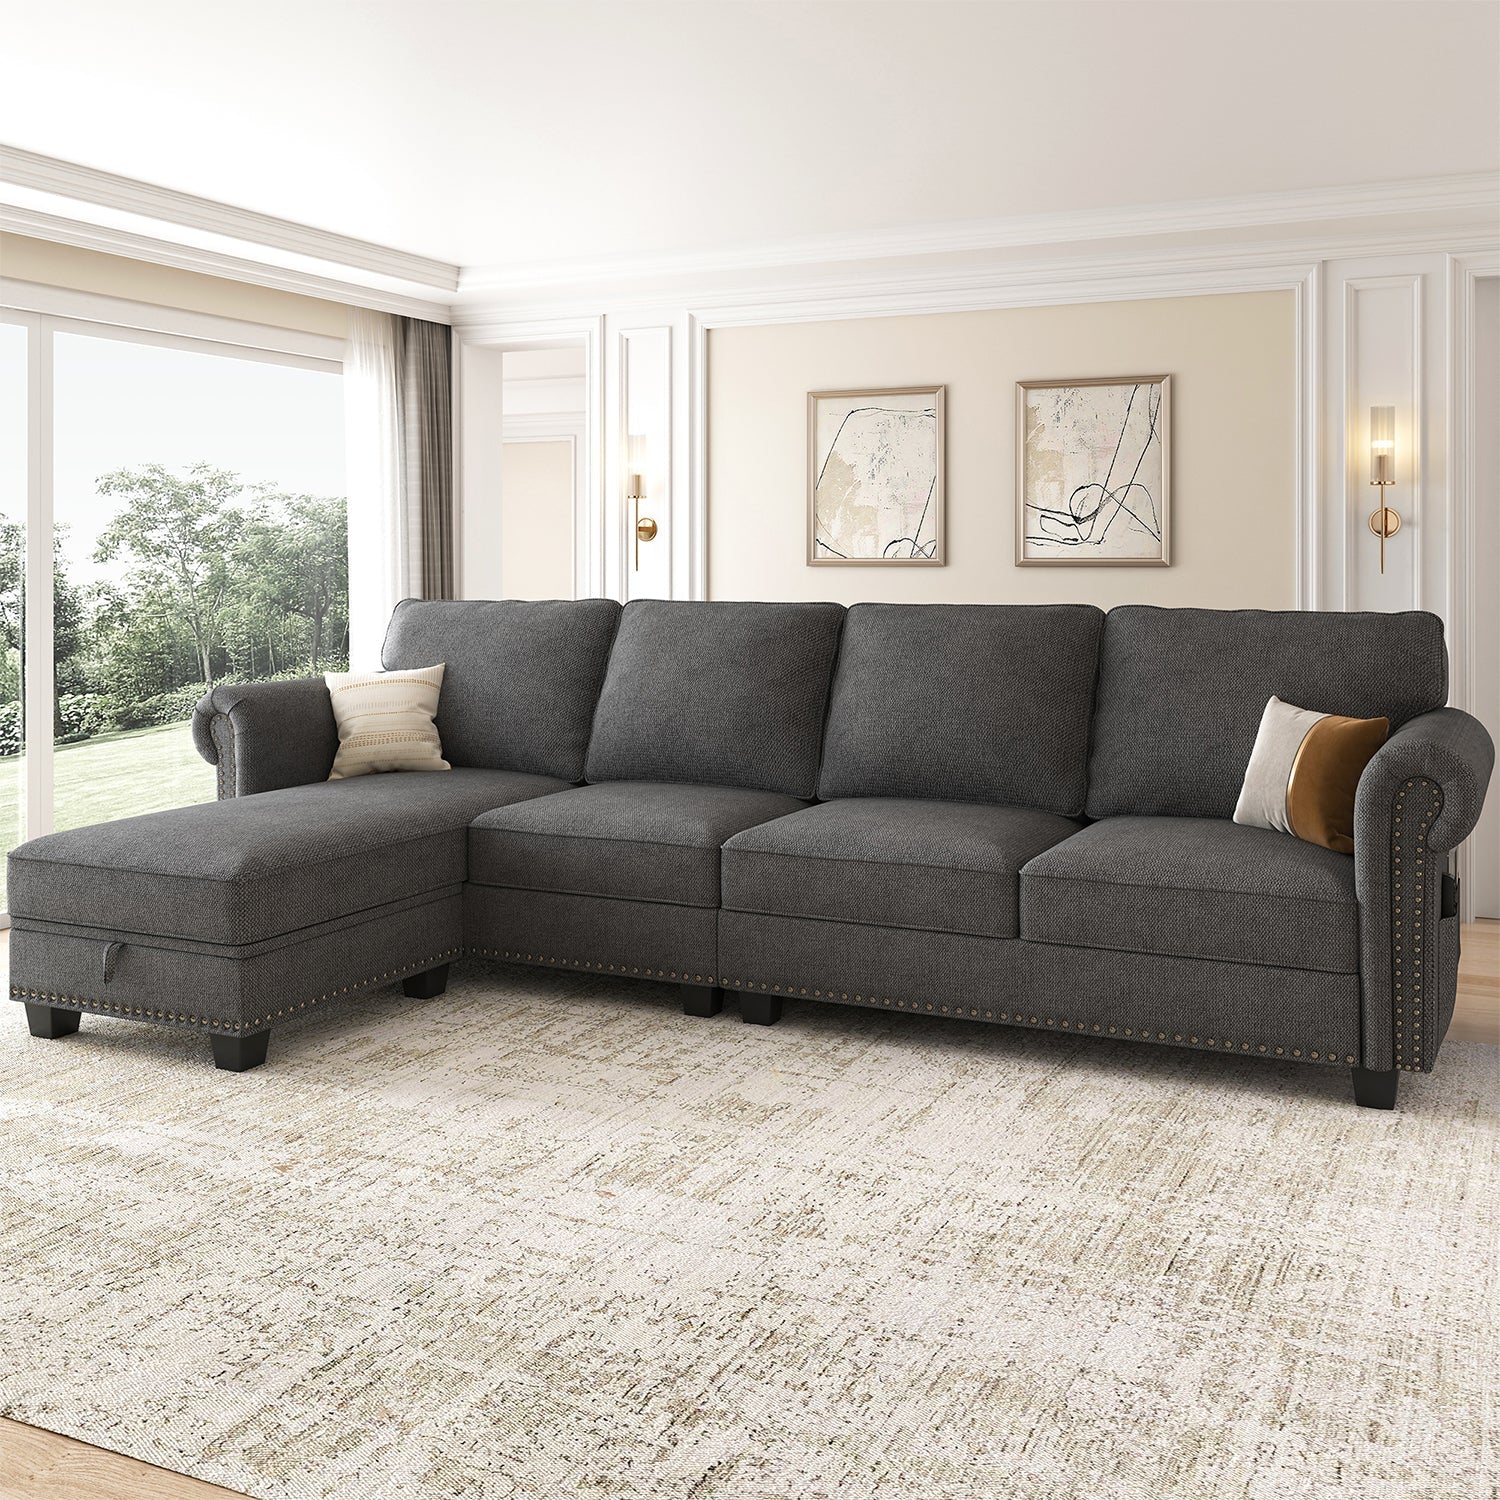 NOLANY 4-Piece Polyester Convertible Sectional